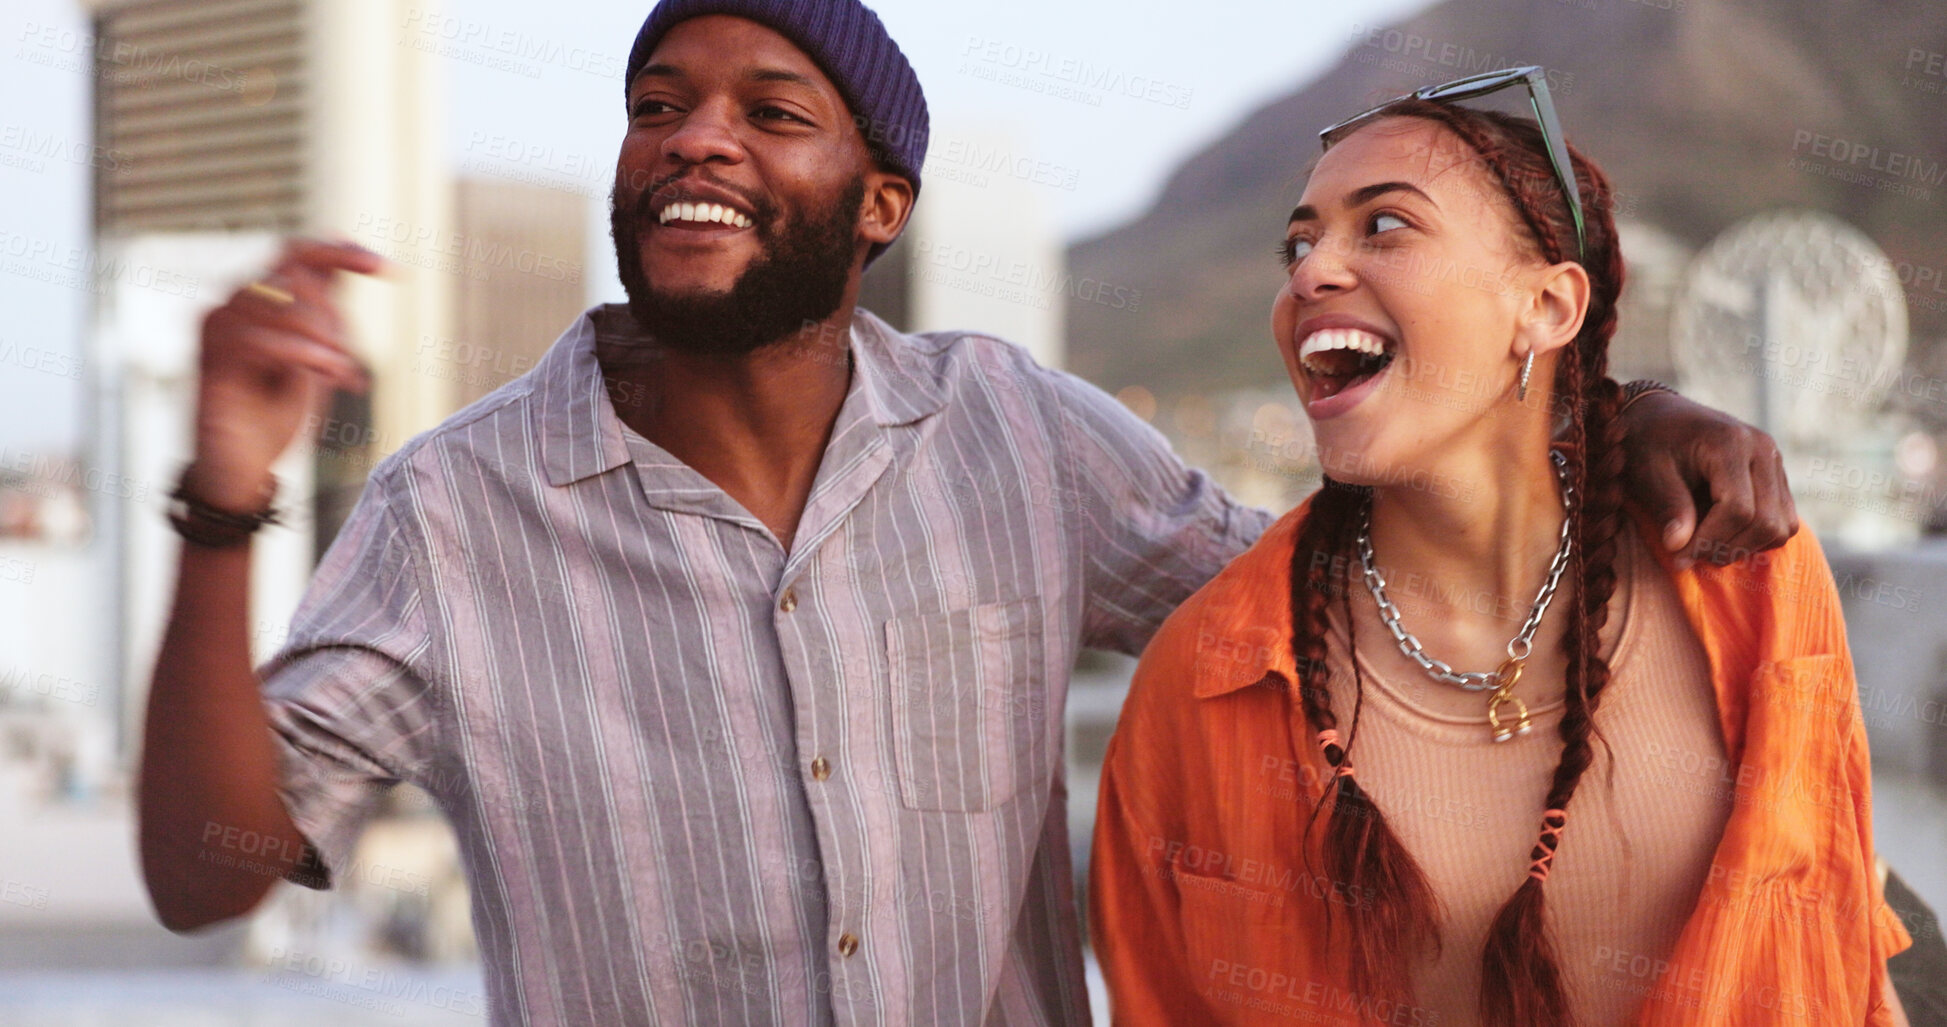 Buy stock photo Happy, conversation and young couple in the city on rooftop of building with freedom, energy and love. Smile, laughing and interracial man and woman talking, walking and bonding on balcony in town.